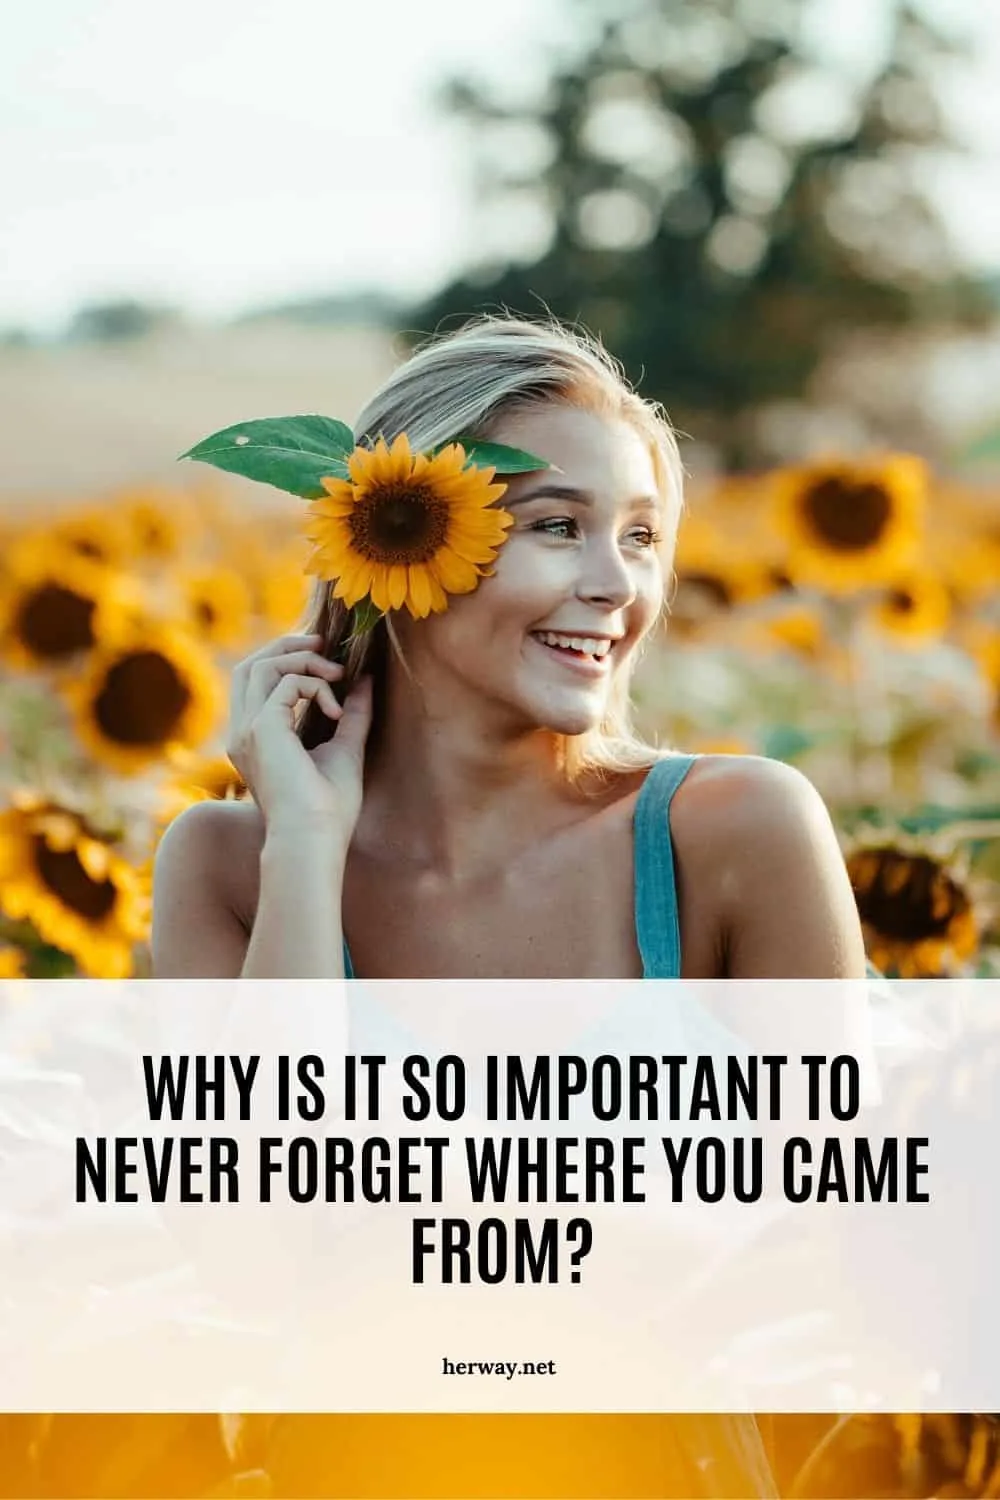 Why Is It So Important To Never Forget Where You Came From?